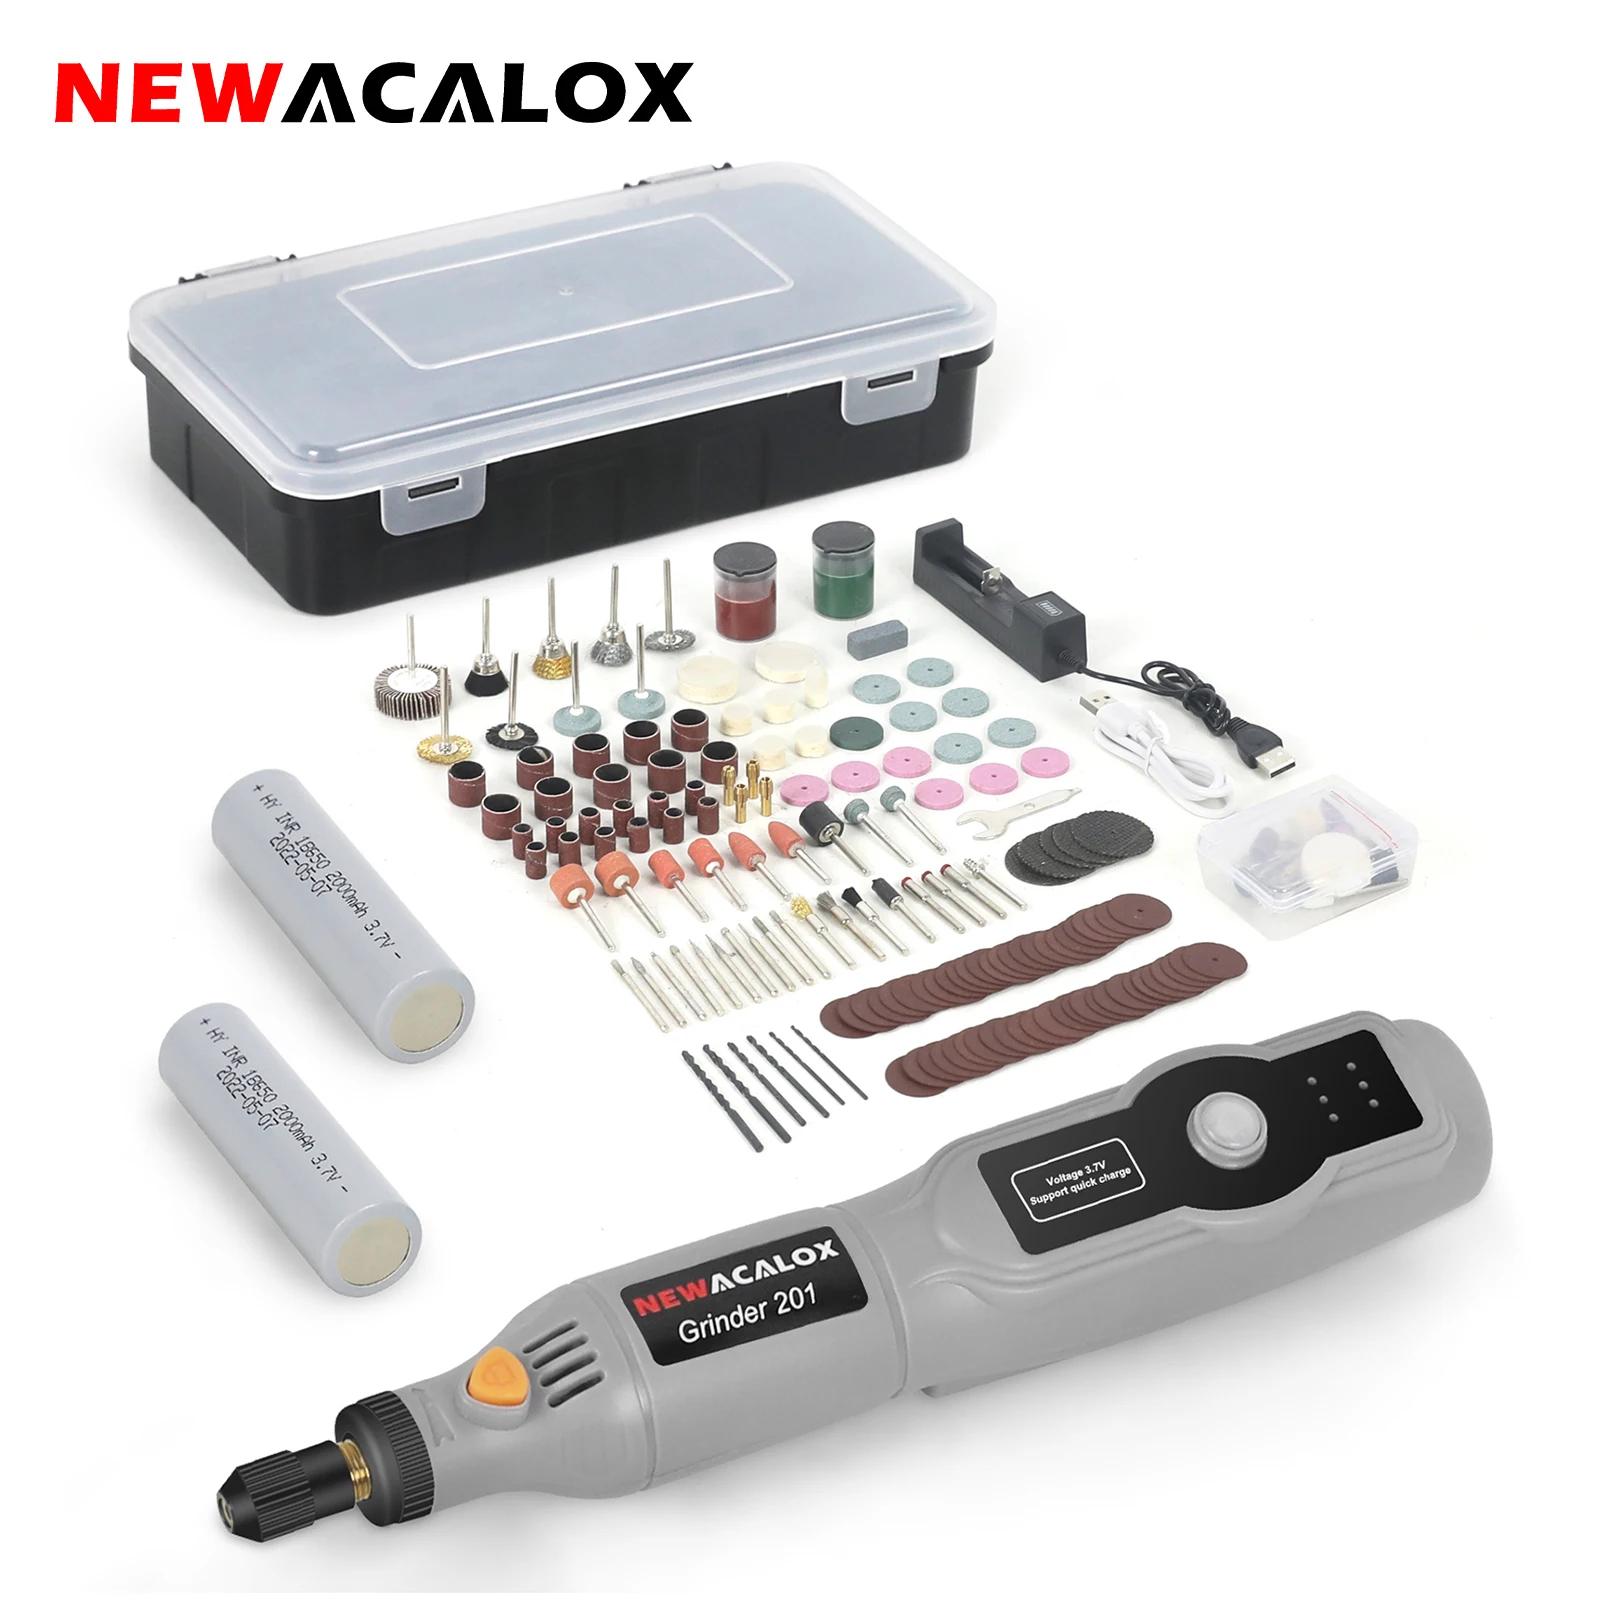 

NEWACALOX Mini Wireless Engraving Polishing Pen 3 Speeds Electric Grinder Drill Rotary Tools For Jewelry Dust Drilling Carving